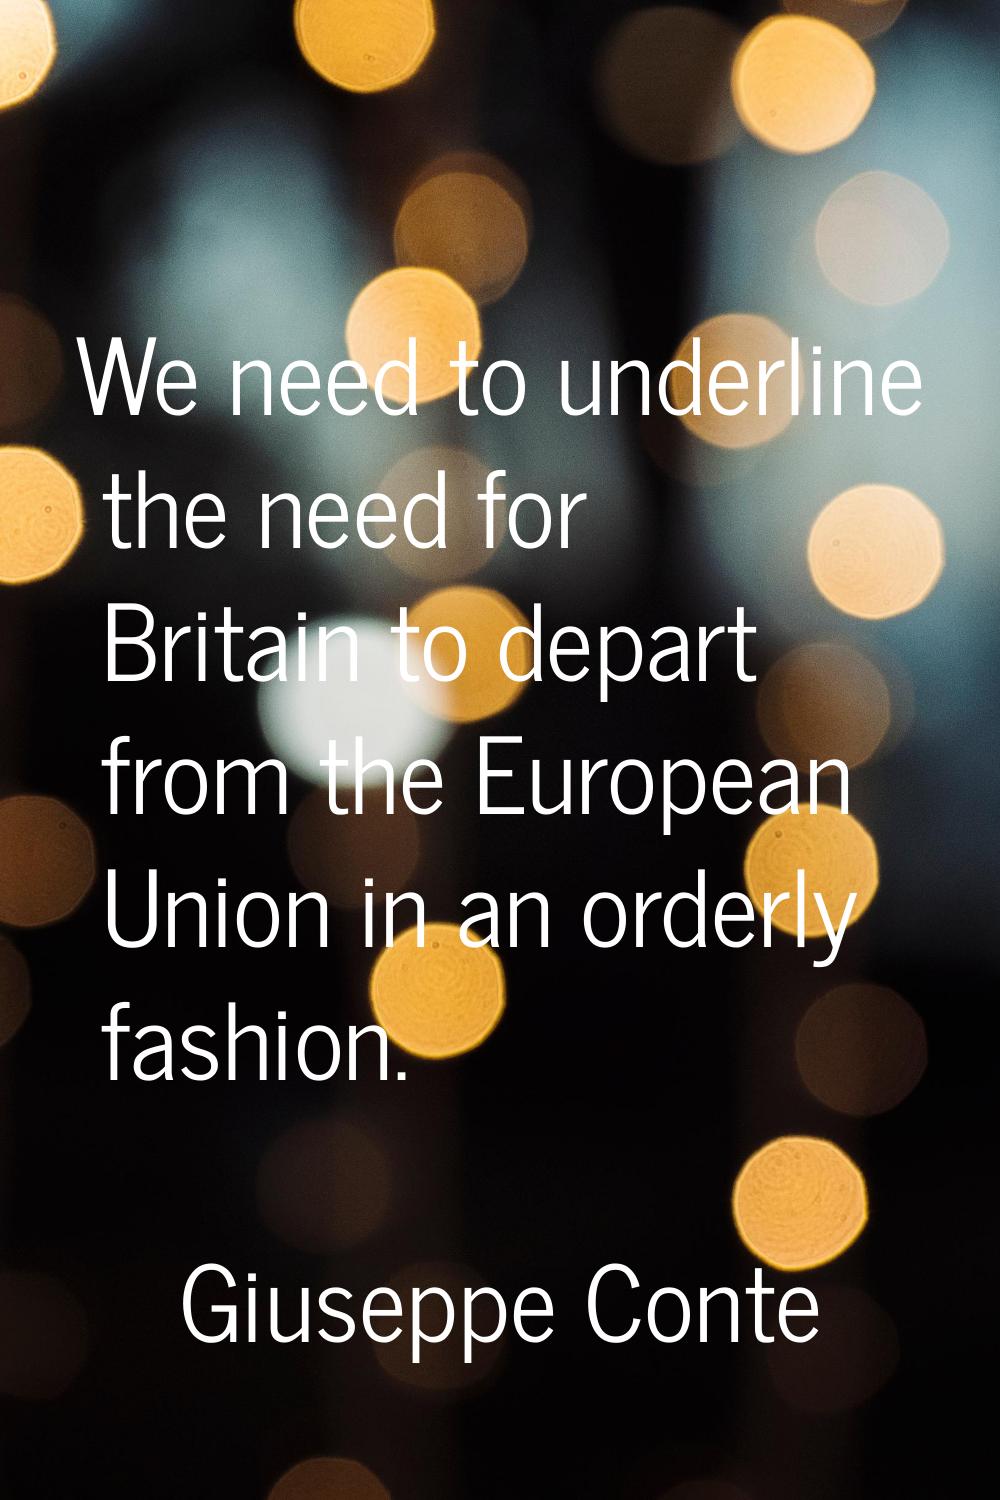 We need to underline the need for Britain to depart from the European Union in an orderly fashion.